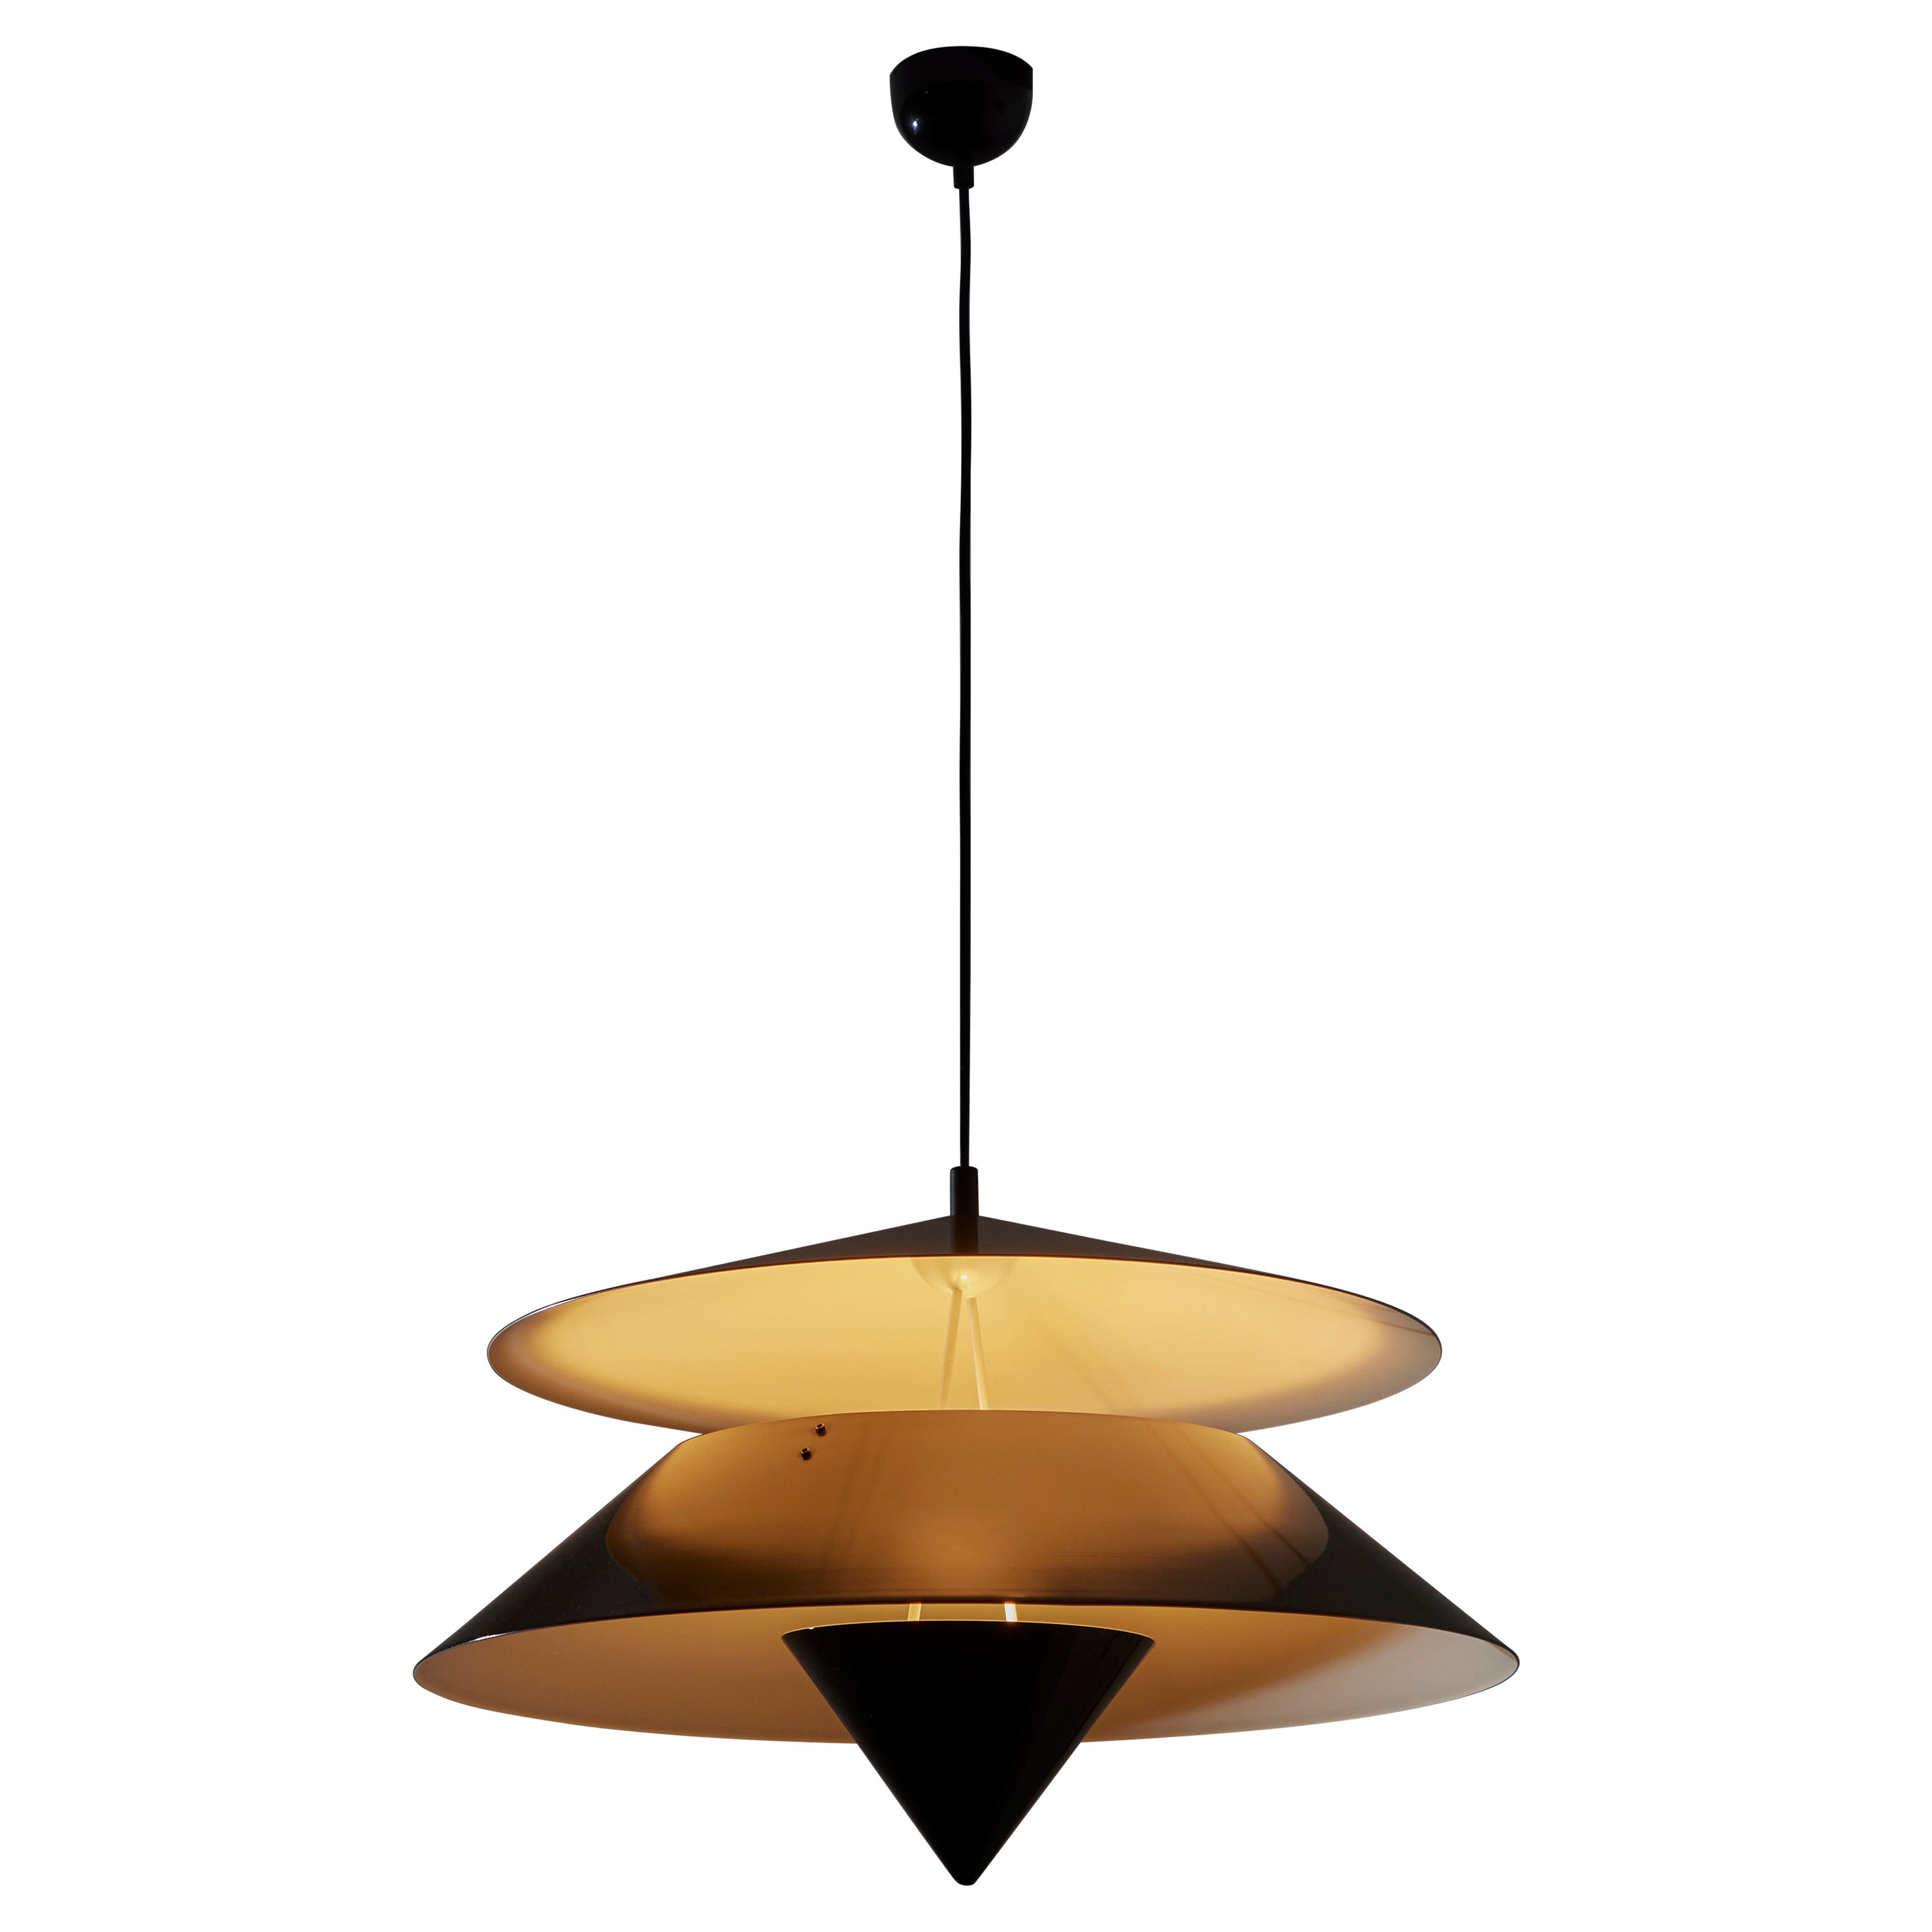 'Akaari' Ceiling Light by Vico Magistretti for Oluce For Sale